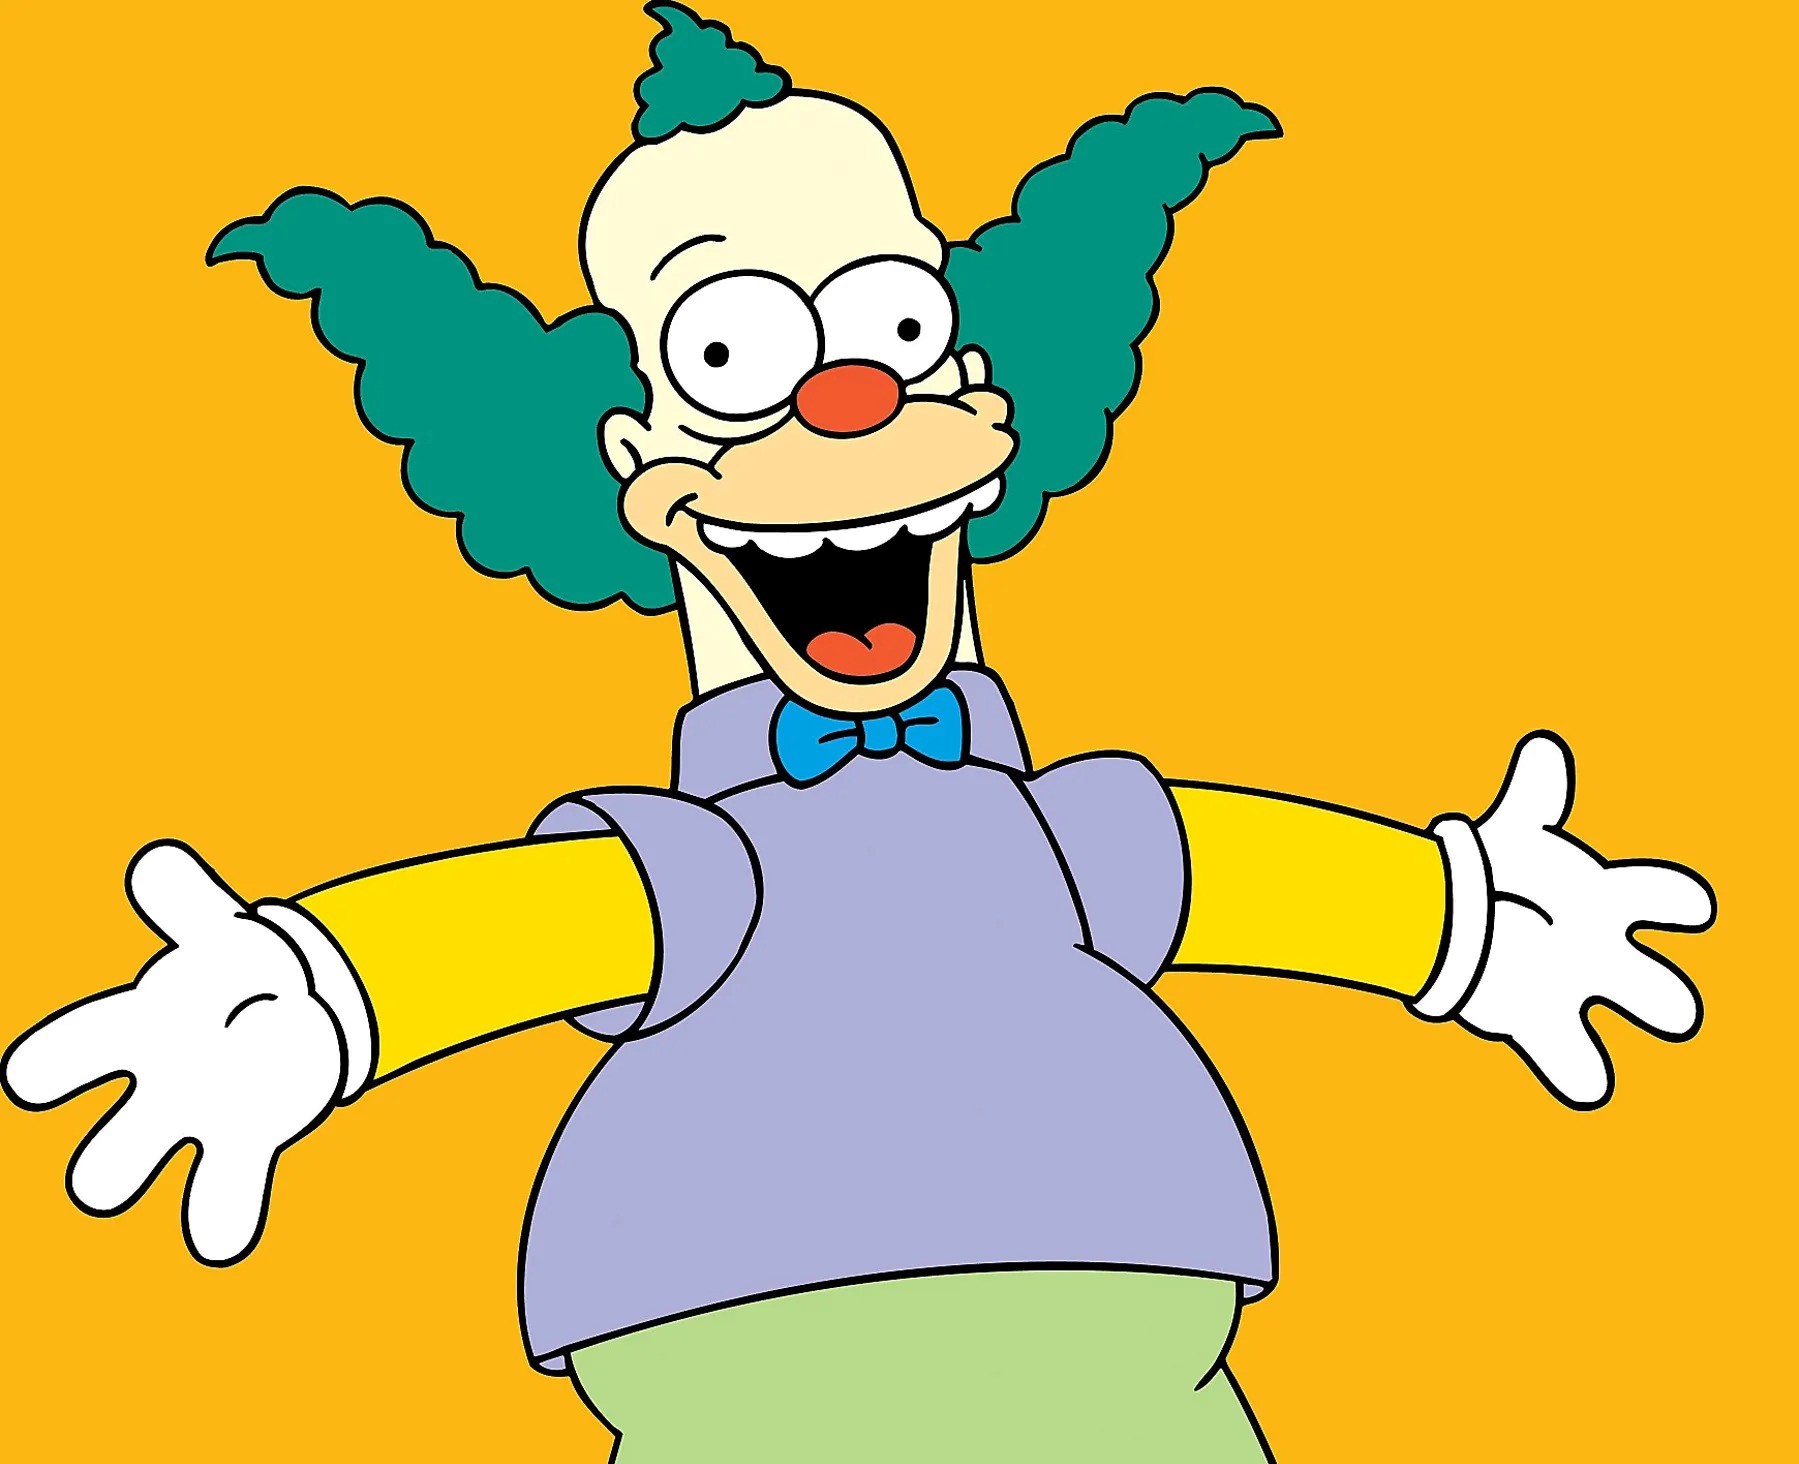 Krusty The Clown The Simpsons Gif Krusty The Clown The Simpsons Bart ...